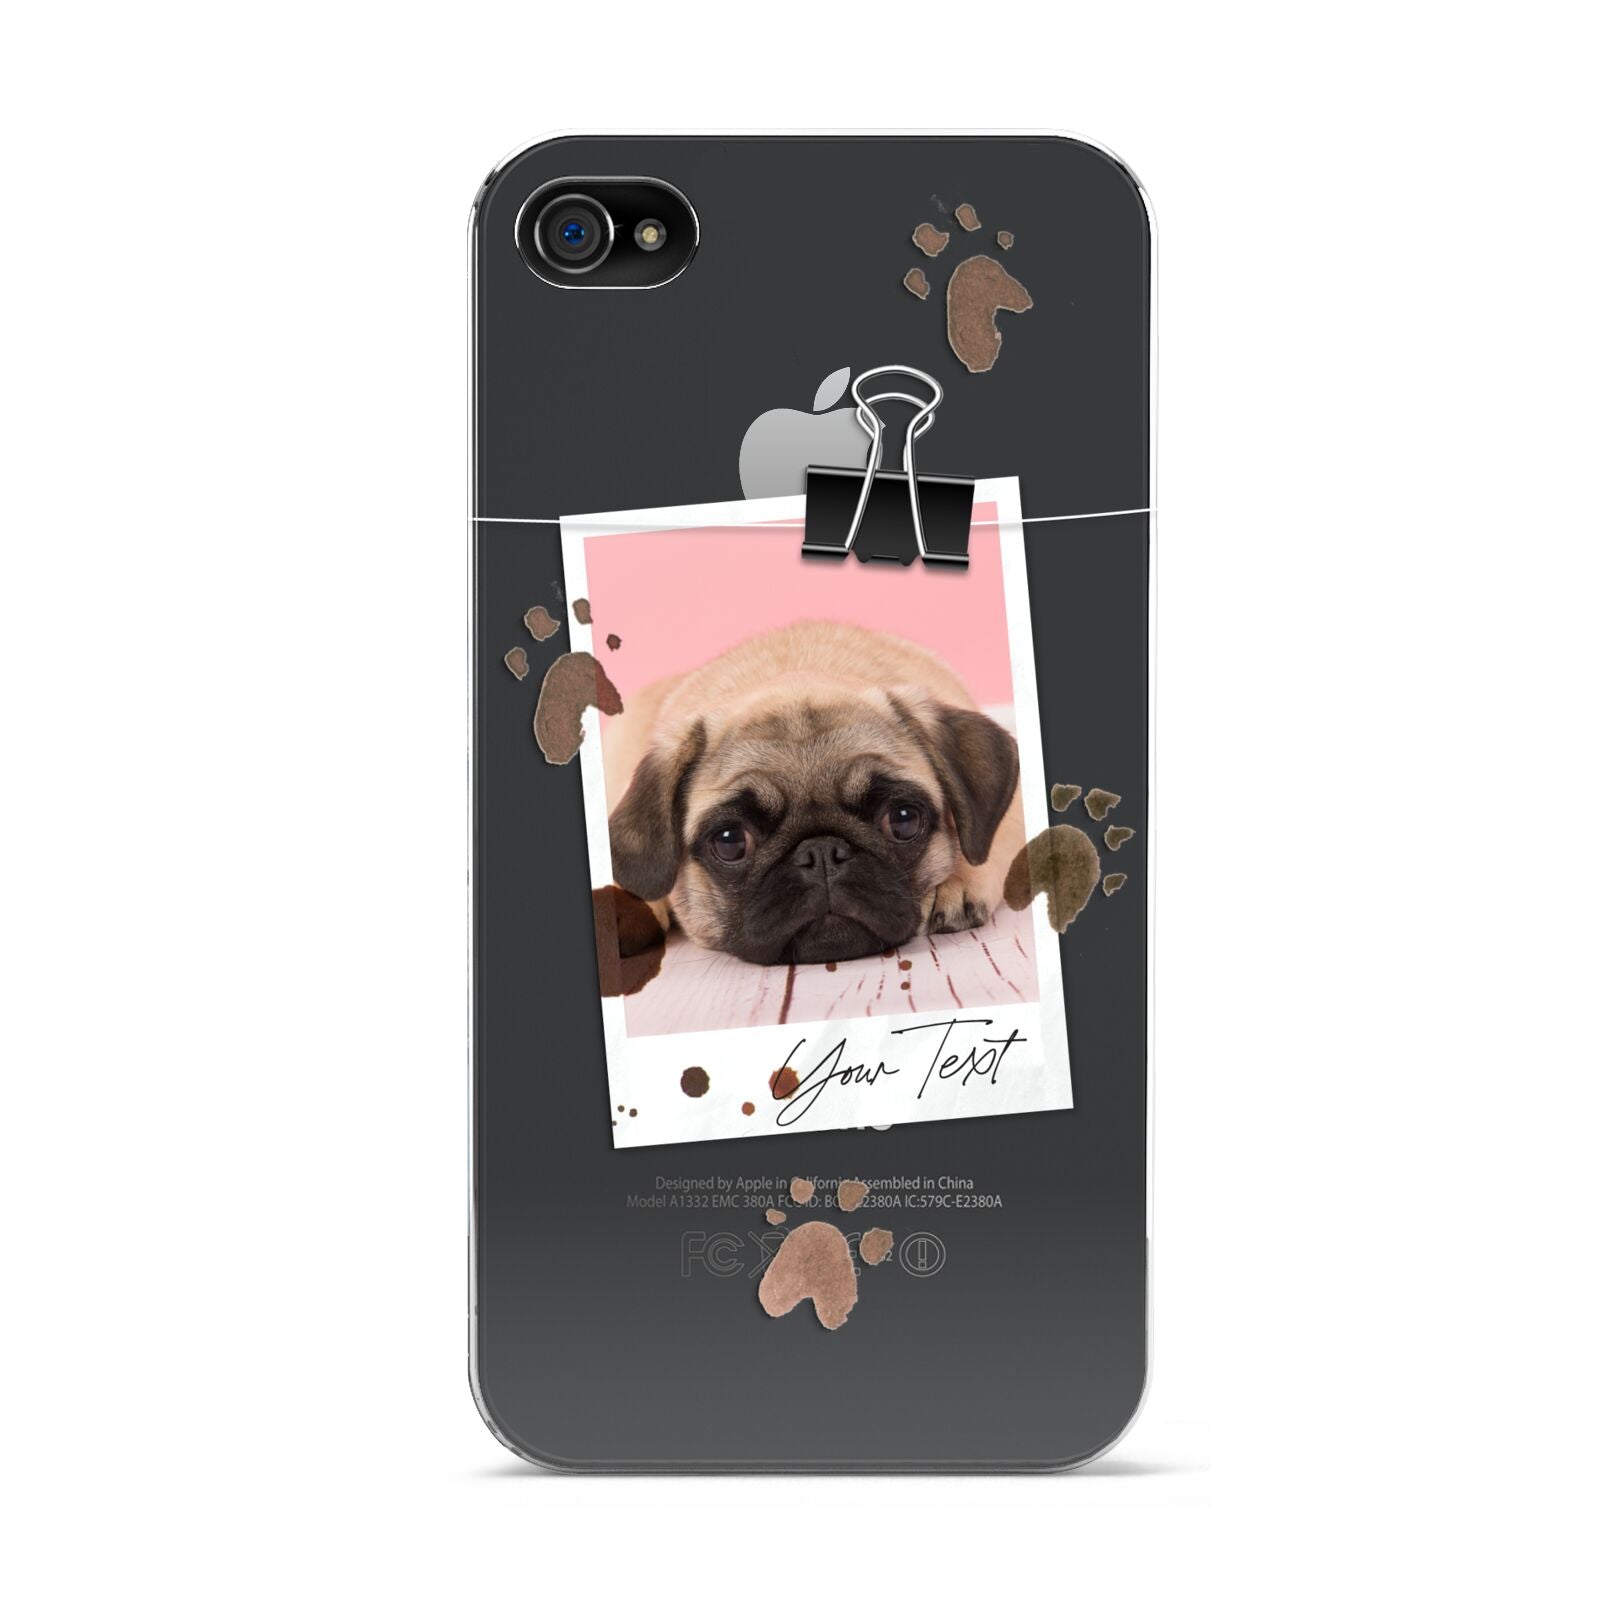 Custom Dog Picture with Name Apple iPhone 4s Case